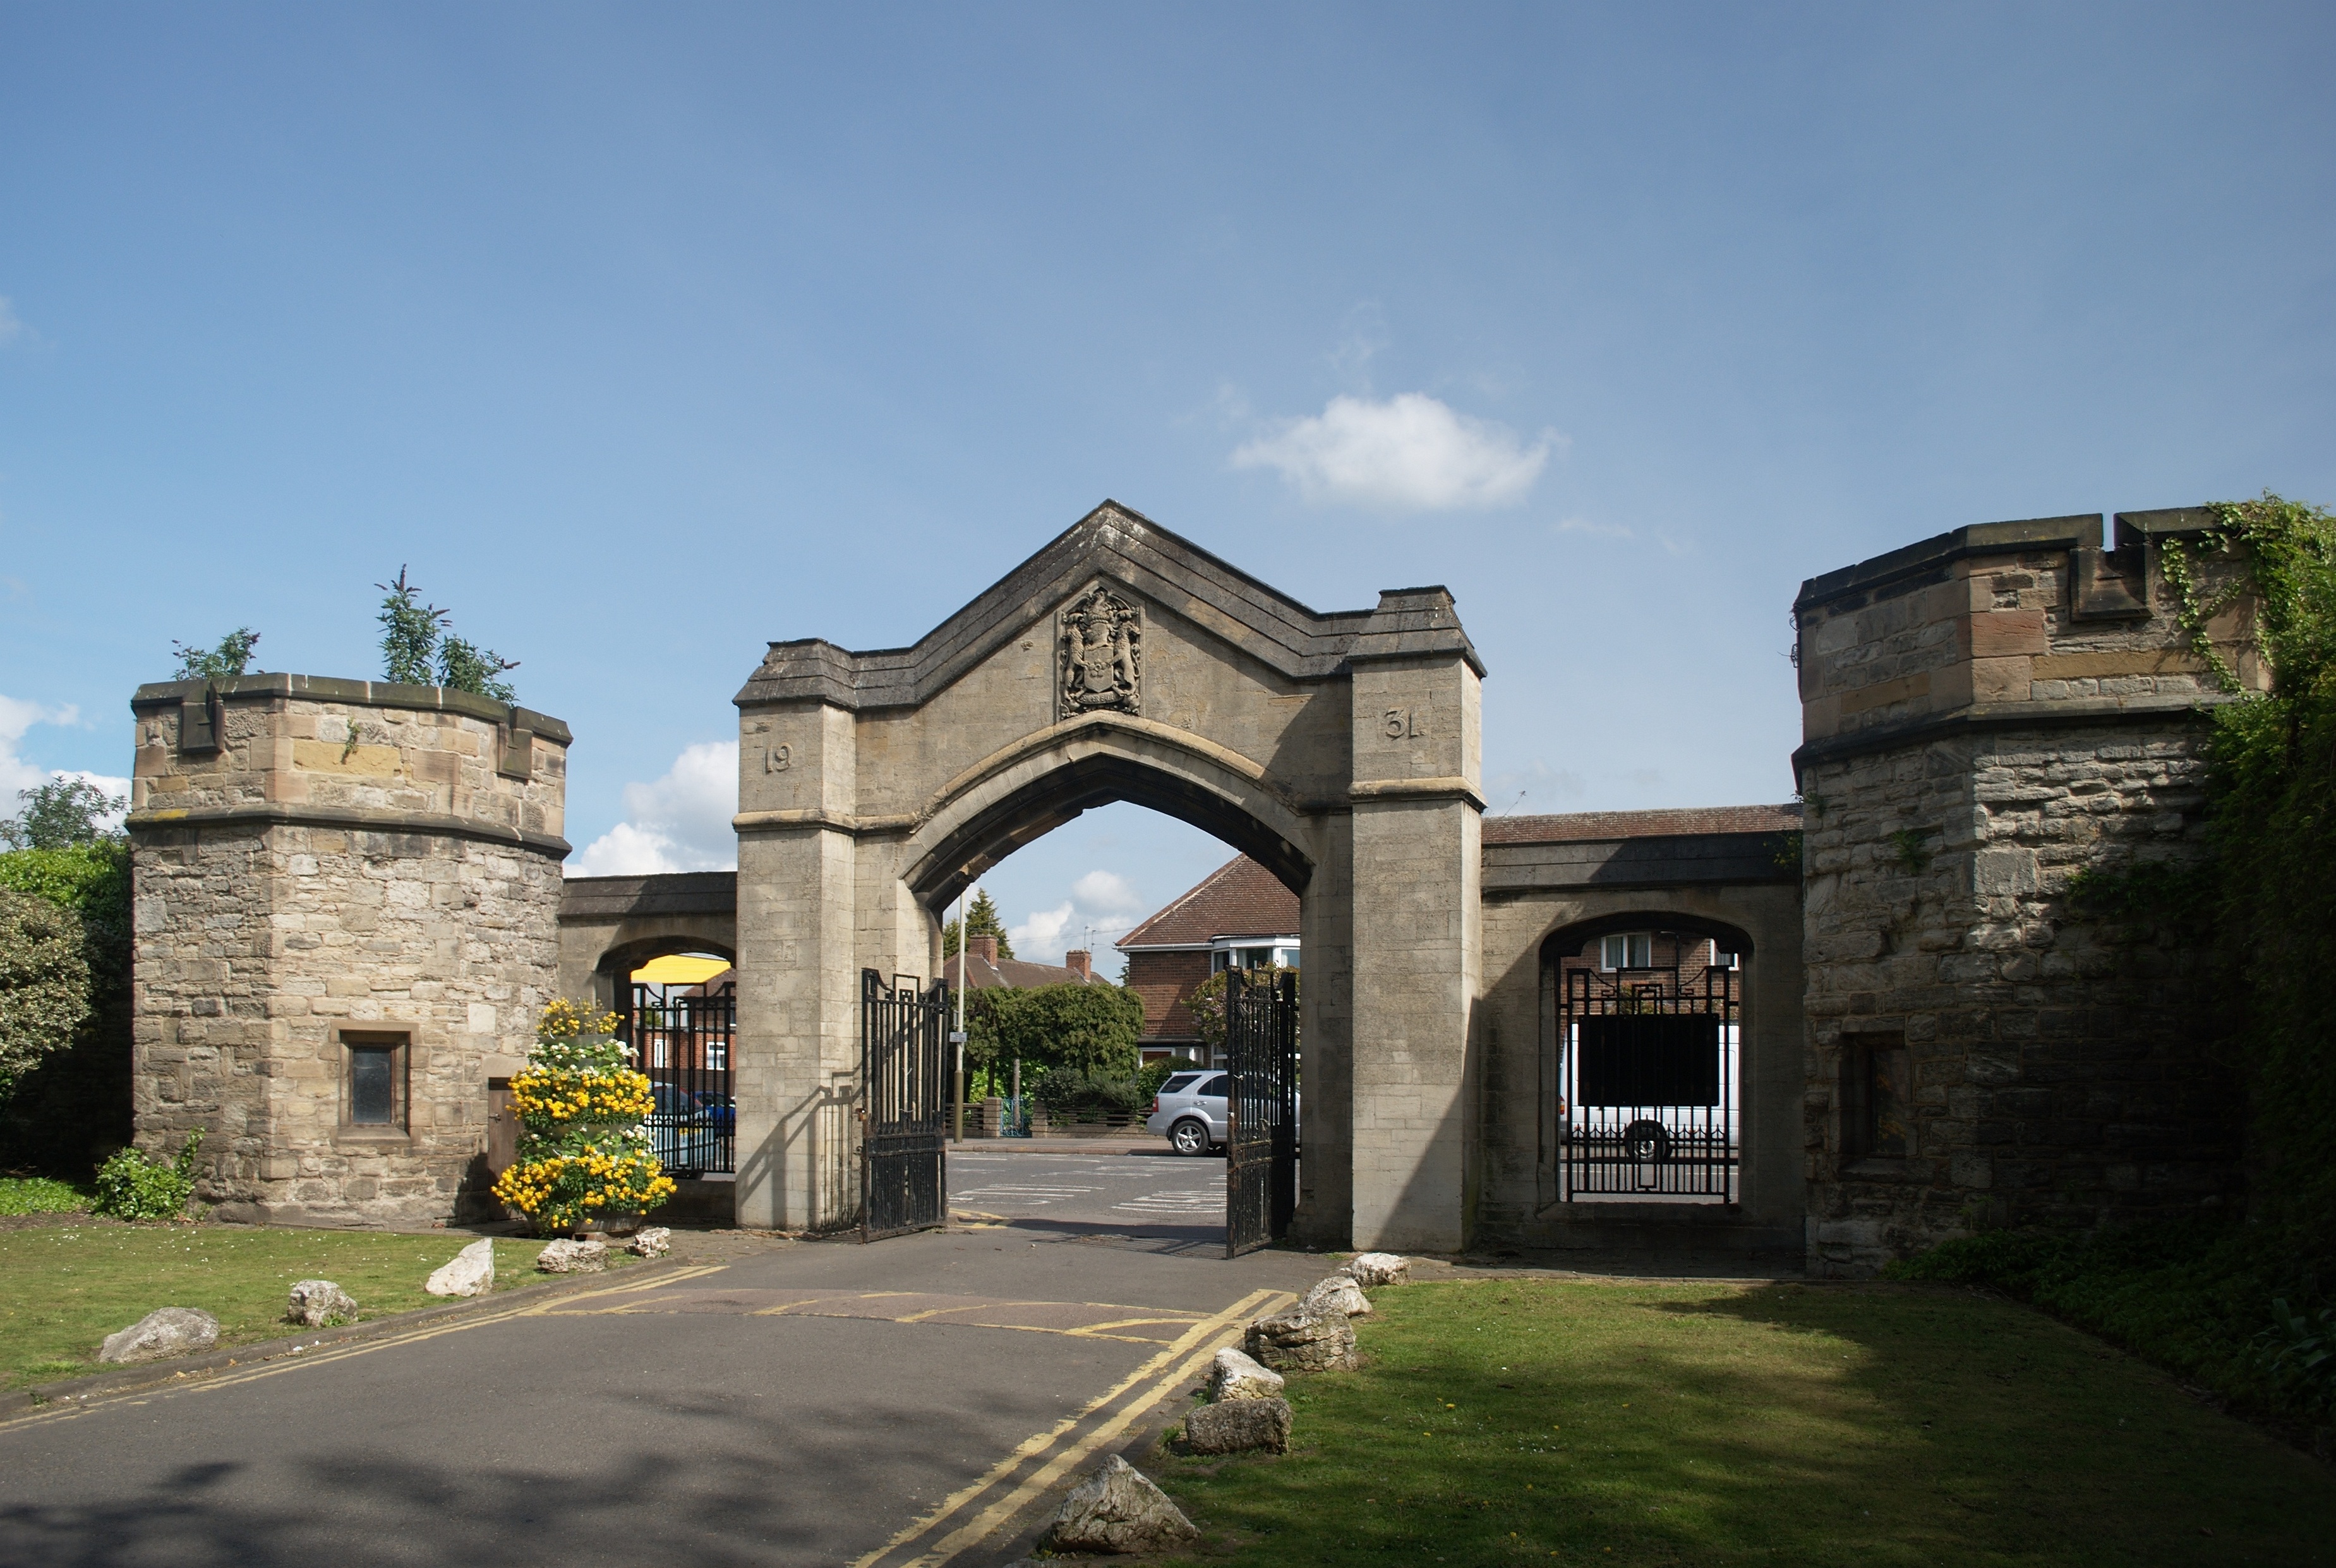 File:Abbey Park Leicester entrance gate.jpg - Wikimedia Commons